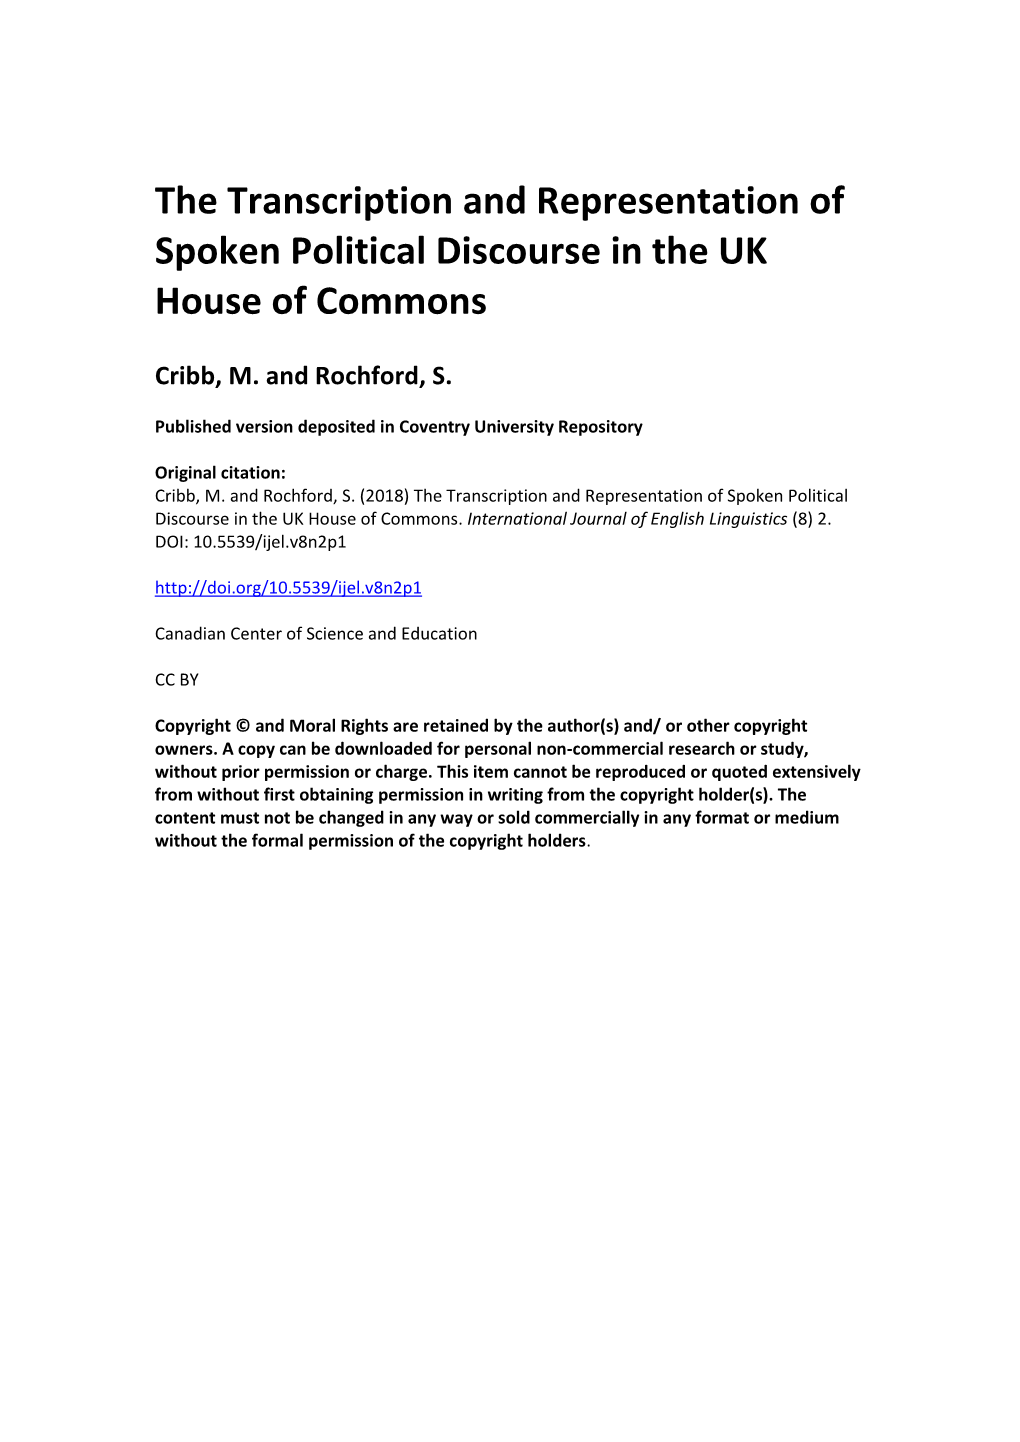 The Transcription and Representation of Spoken Political Discourse in the UK House of Commons